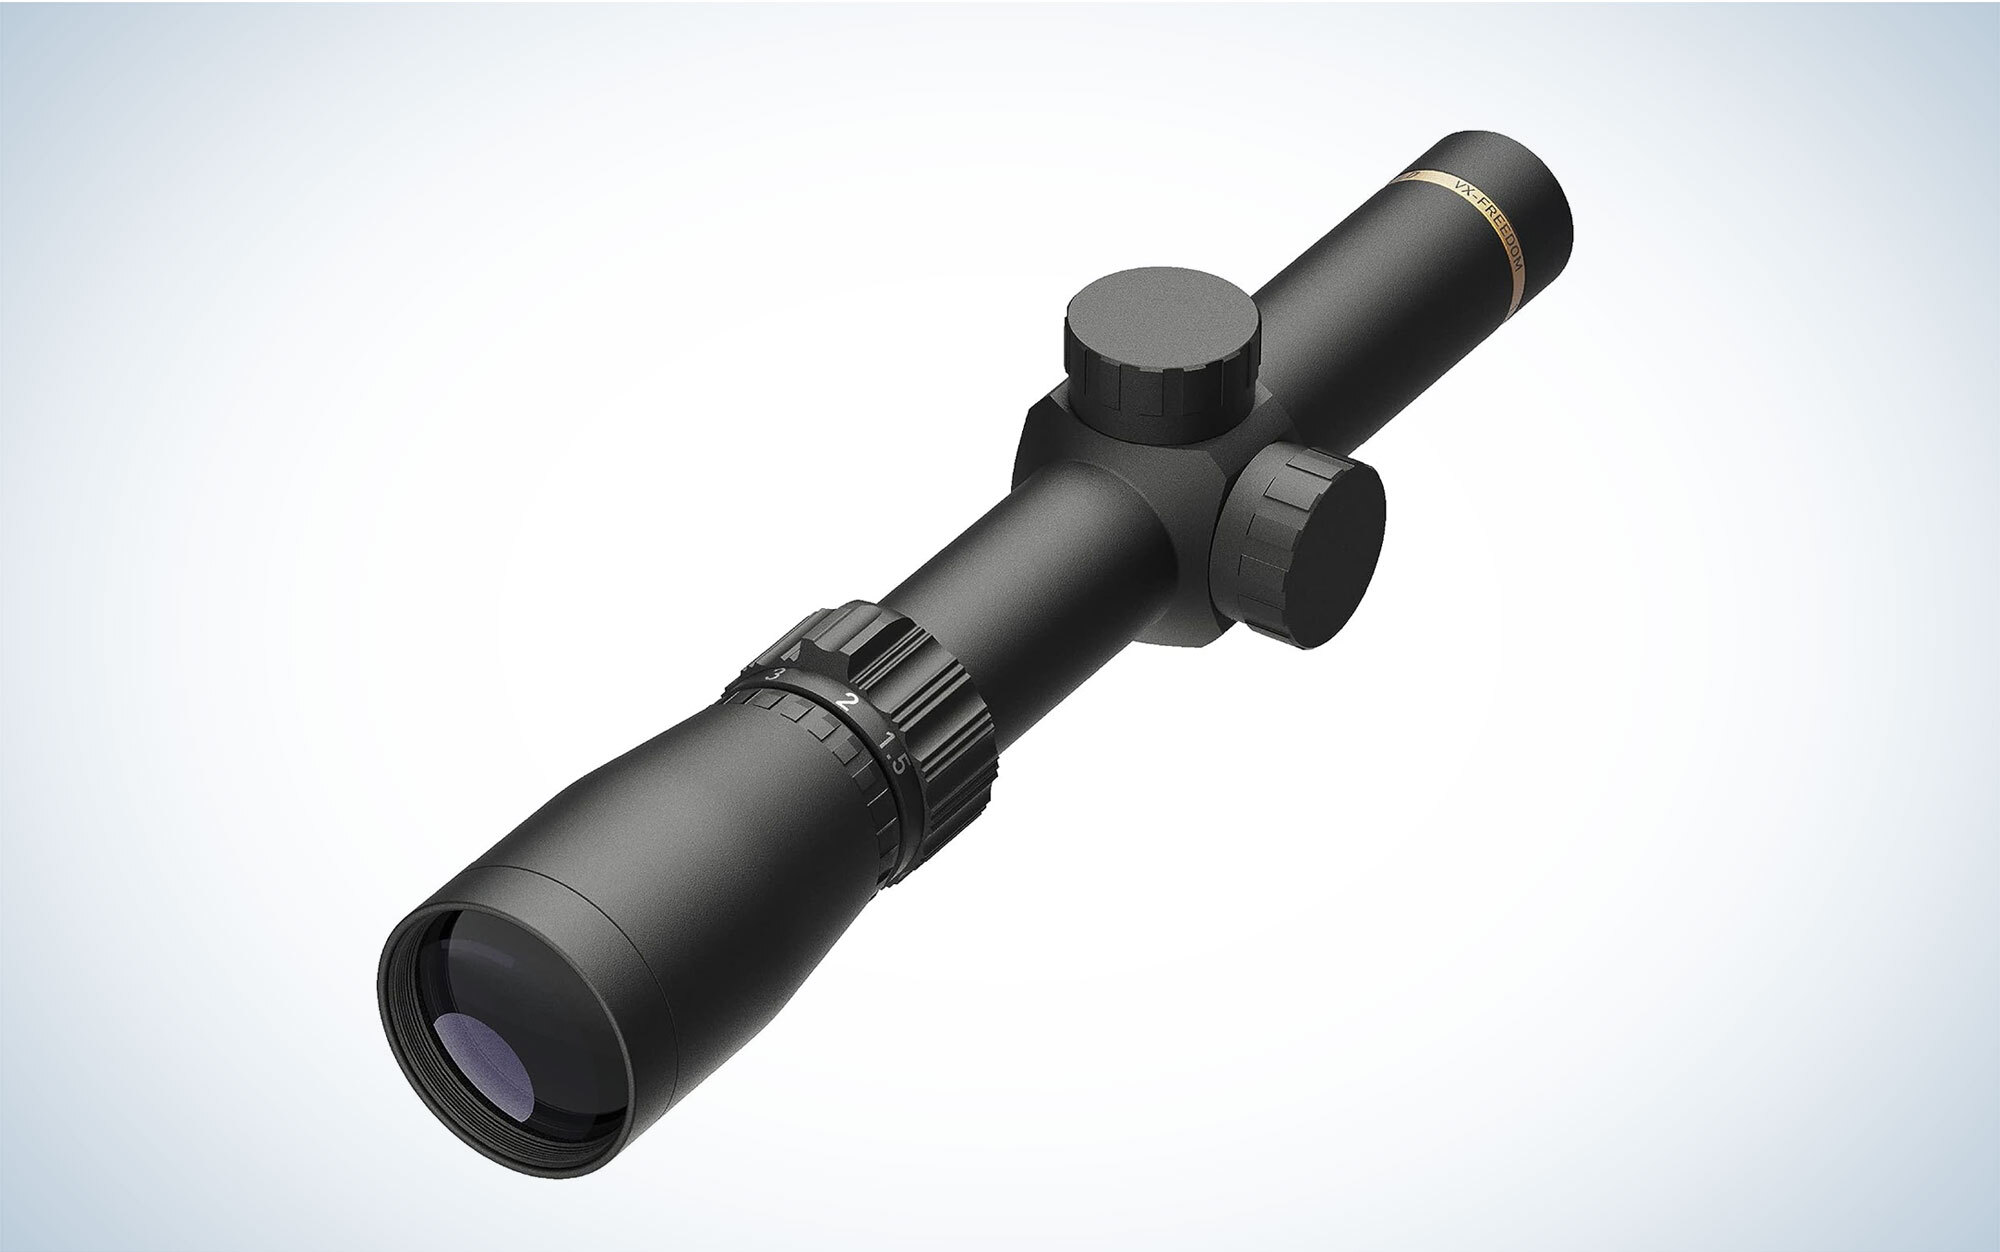 We tested the Leupold LVPO.